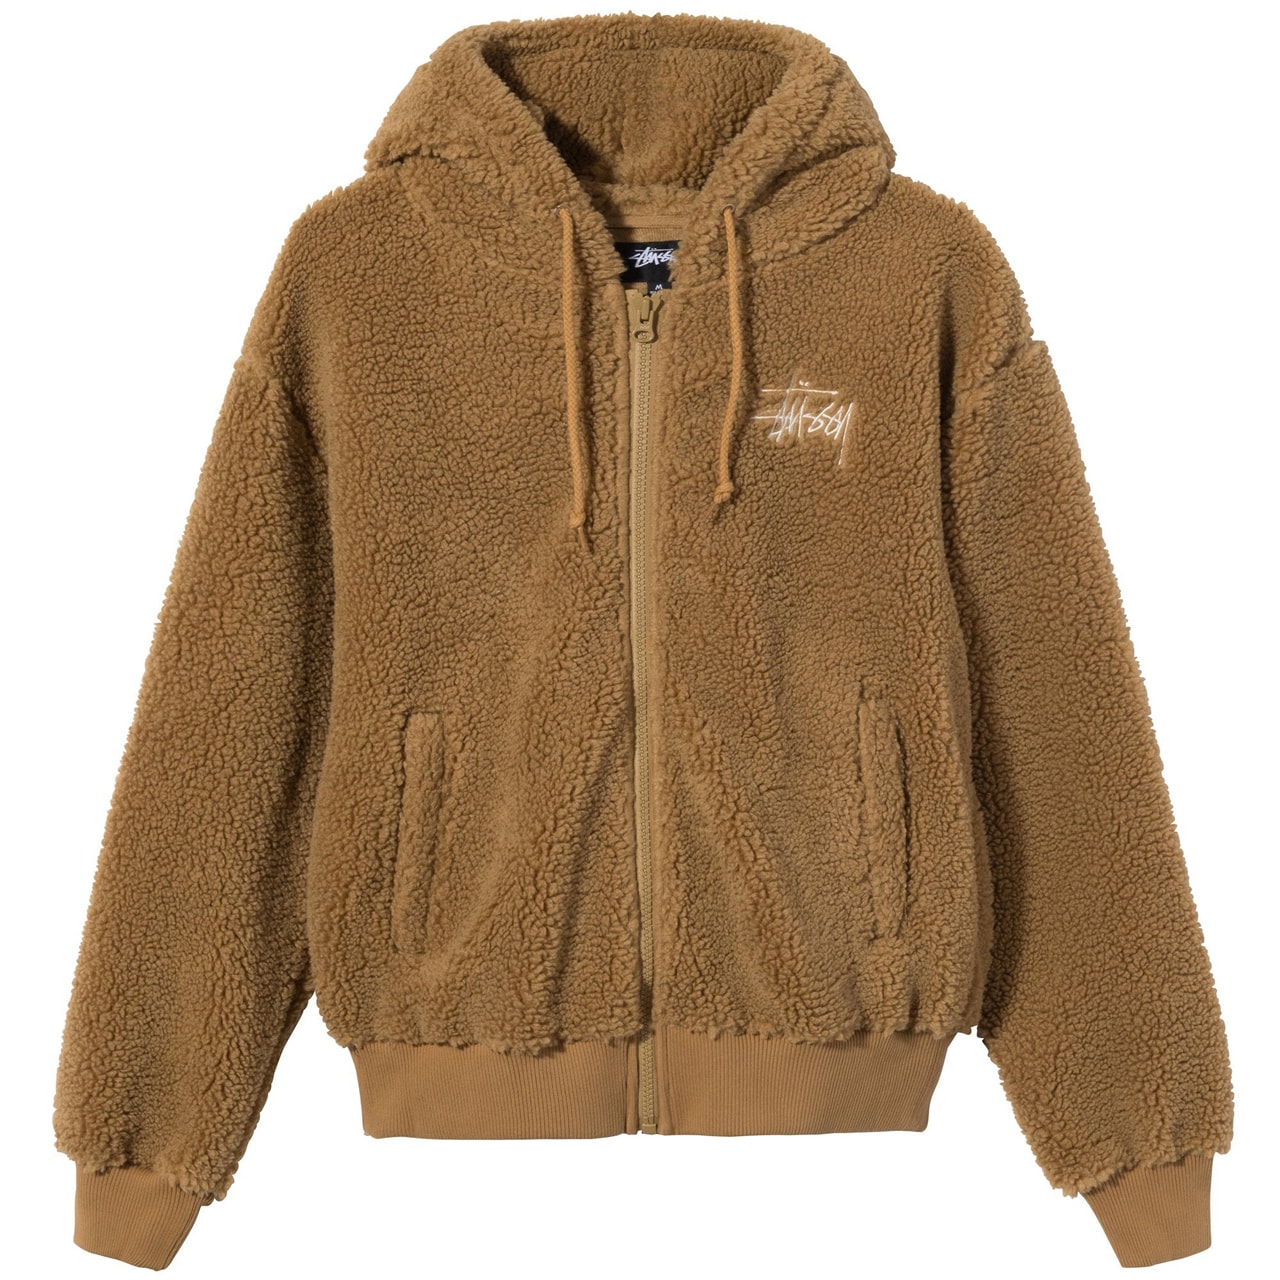 Stüssy Spring 2021 Collection Second Delivery summer ss21 release date info buy colorway fleece jacket belt hat accessories hoodie dye